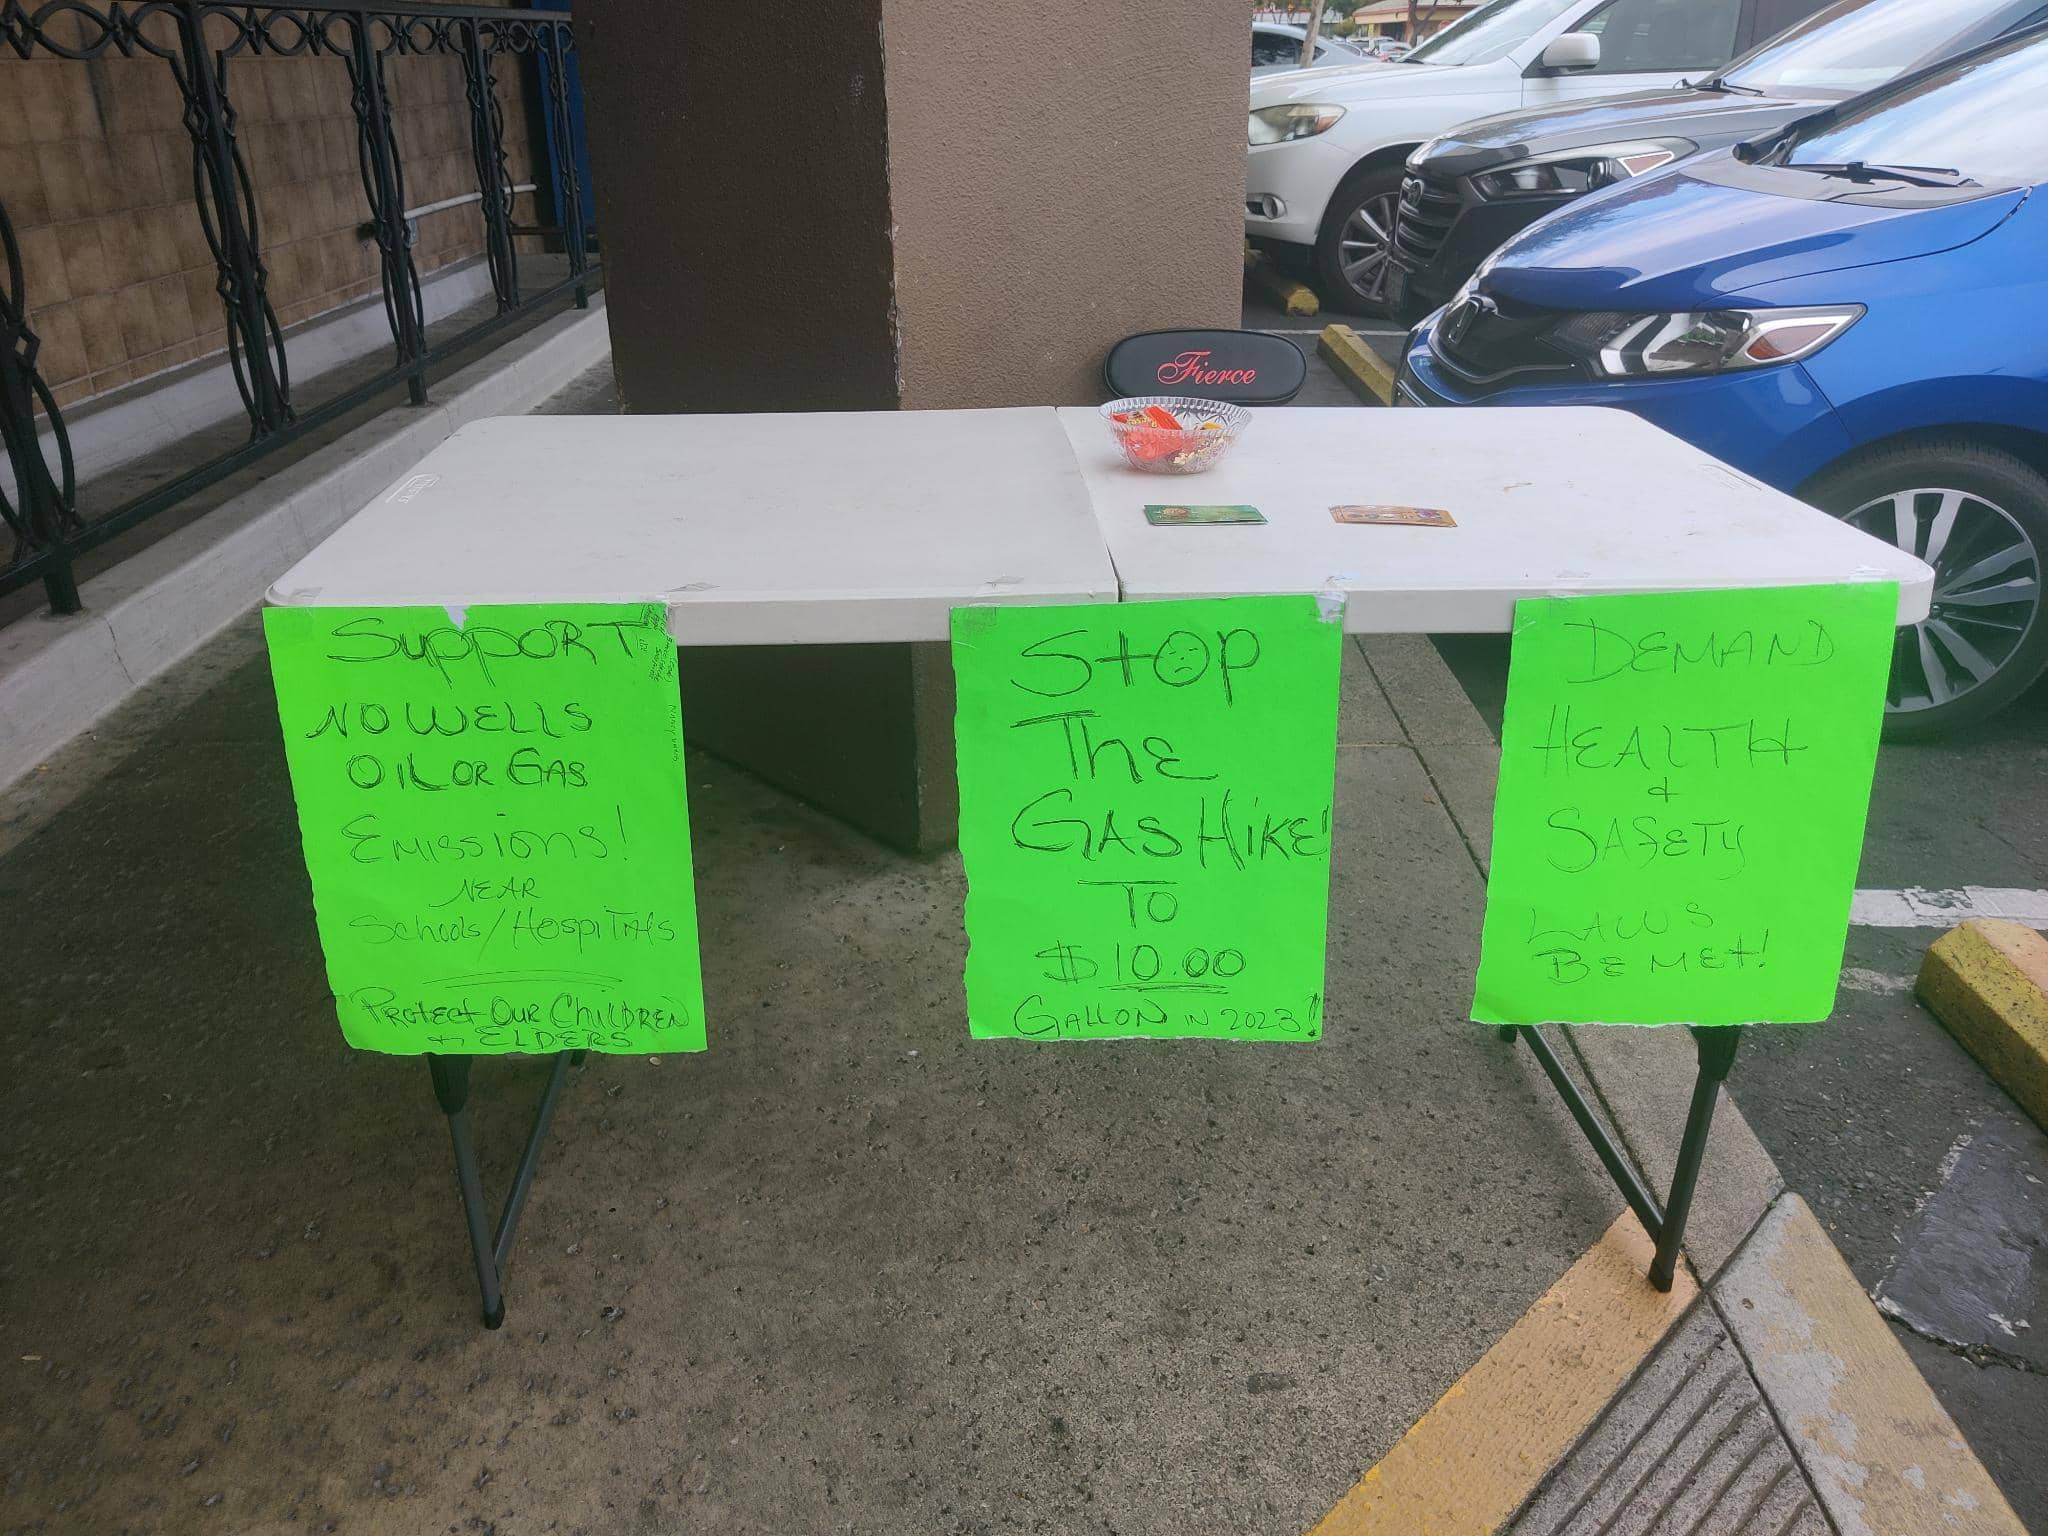 a table in a parking lot with signs attached reading "demand health and safety" and "stop the gas hike"